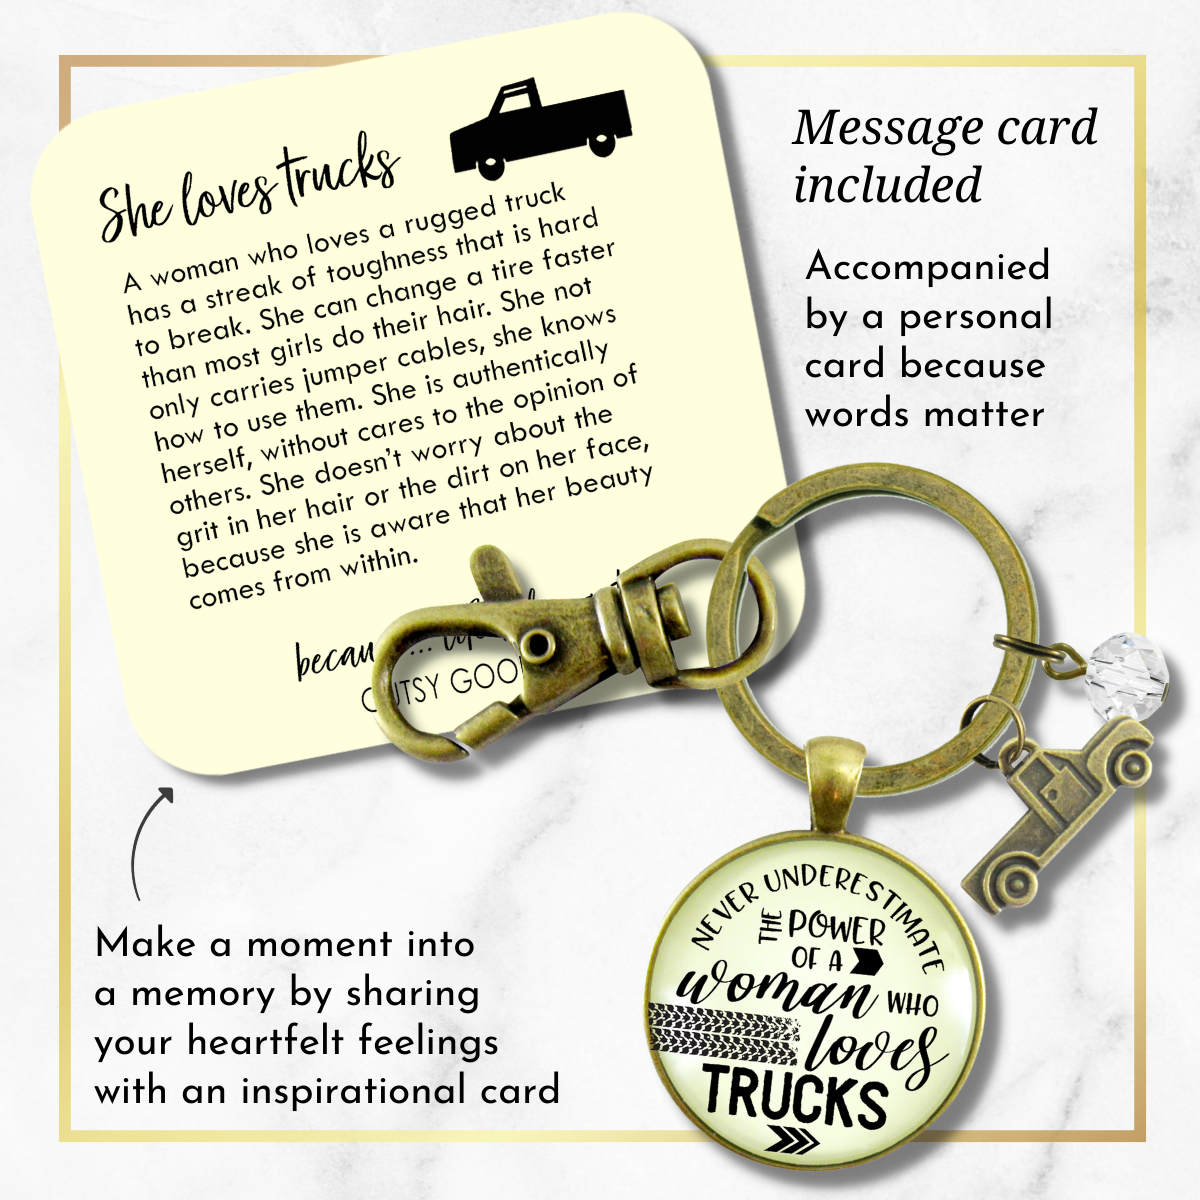 Truck Charm Keychain Never Underestimate Woman Loves Country Jewelry - Gutsy Goodness Handmade Jewelry;Truck Charm Keychain Never Underestimate Woman Loves Country Jewelry - Gutsy Goodness Handmade Jewelry Gifts